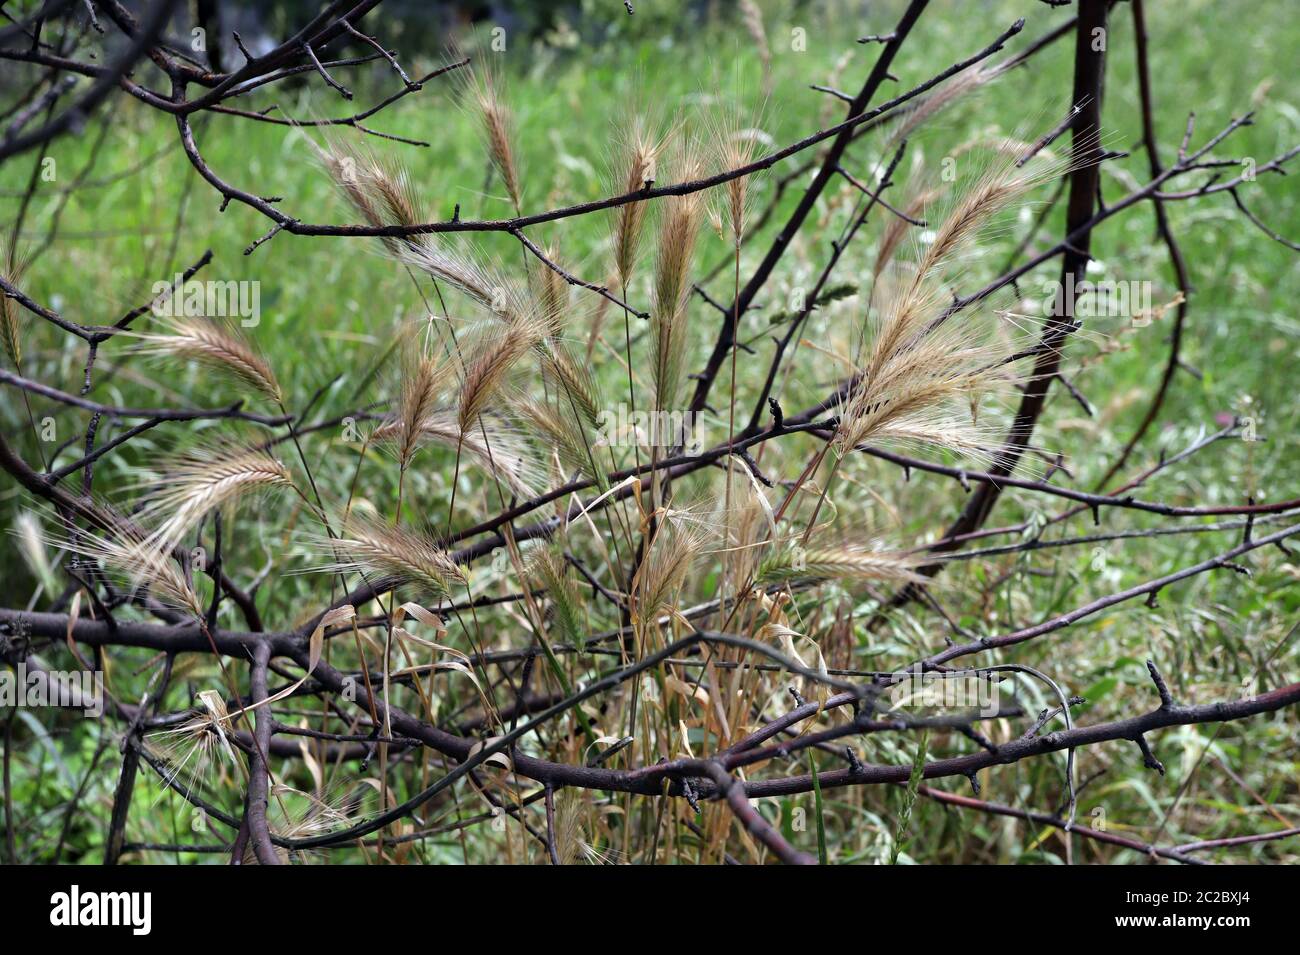 Grass awns that can be dangerous for dogs. June grass ears. Stock Photo